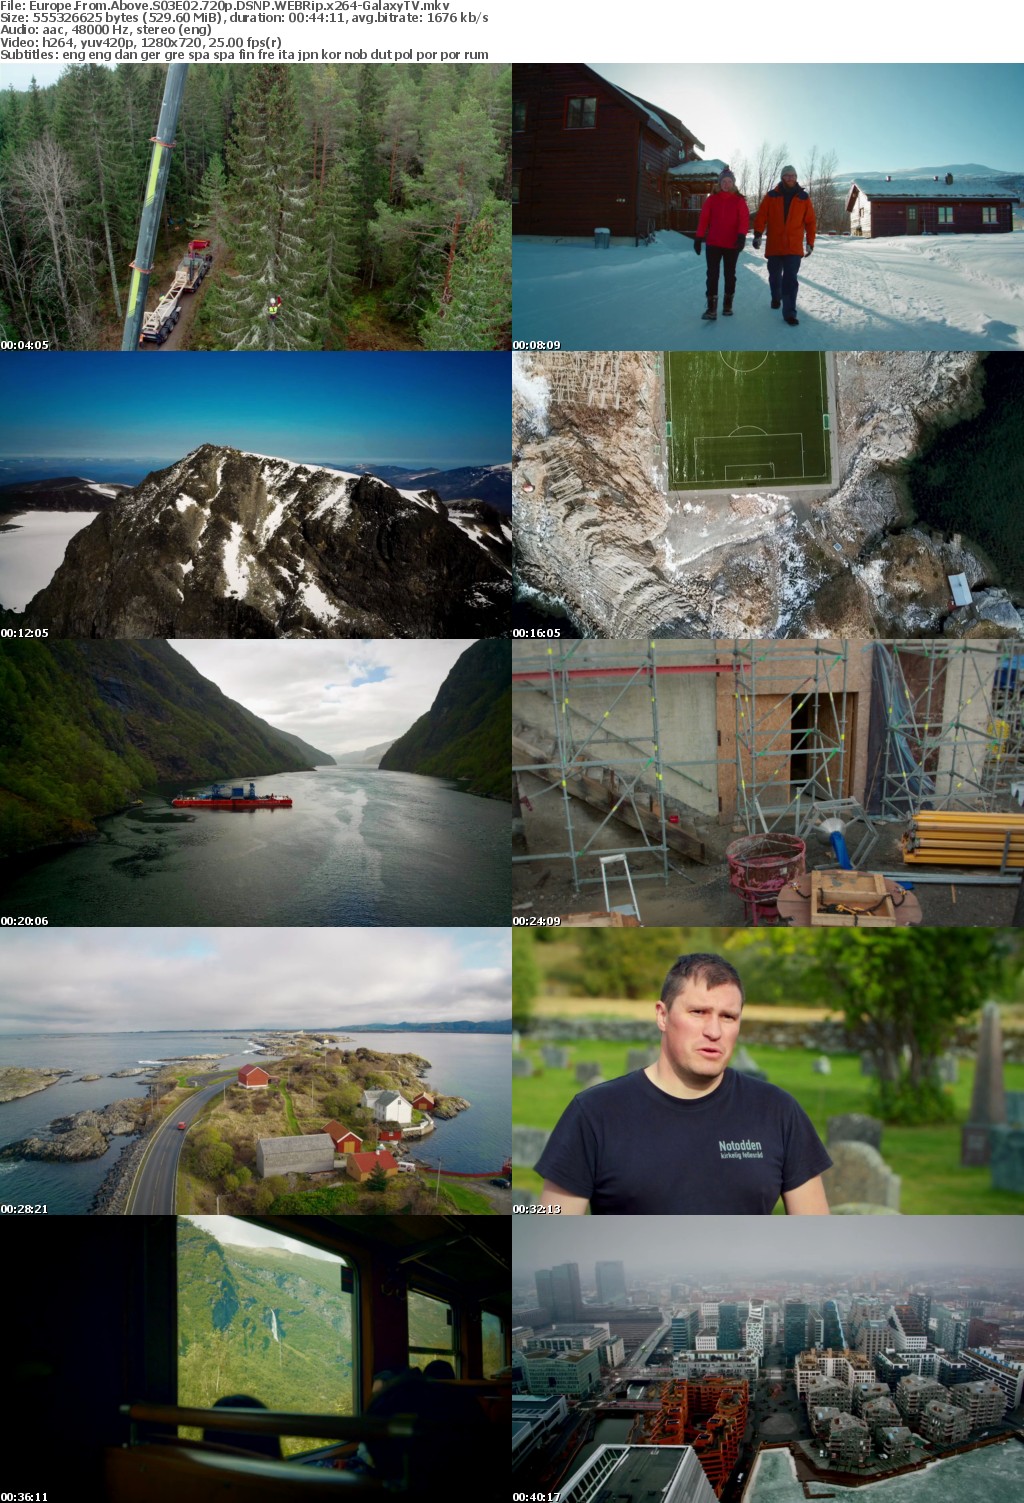 Europe From Above S03 COMPLETE 720p DSNP WEBRip x264-GalaxyTV